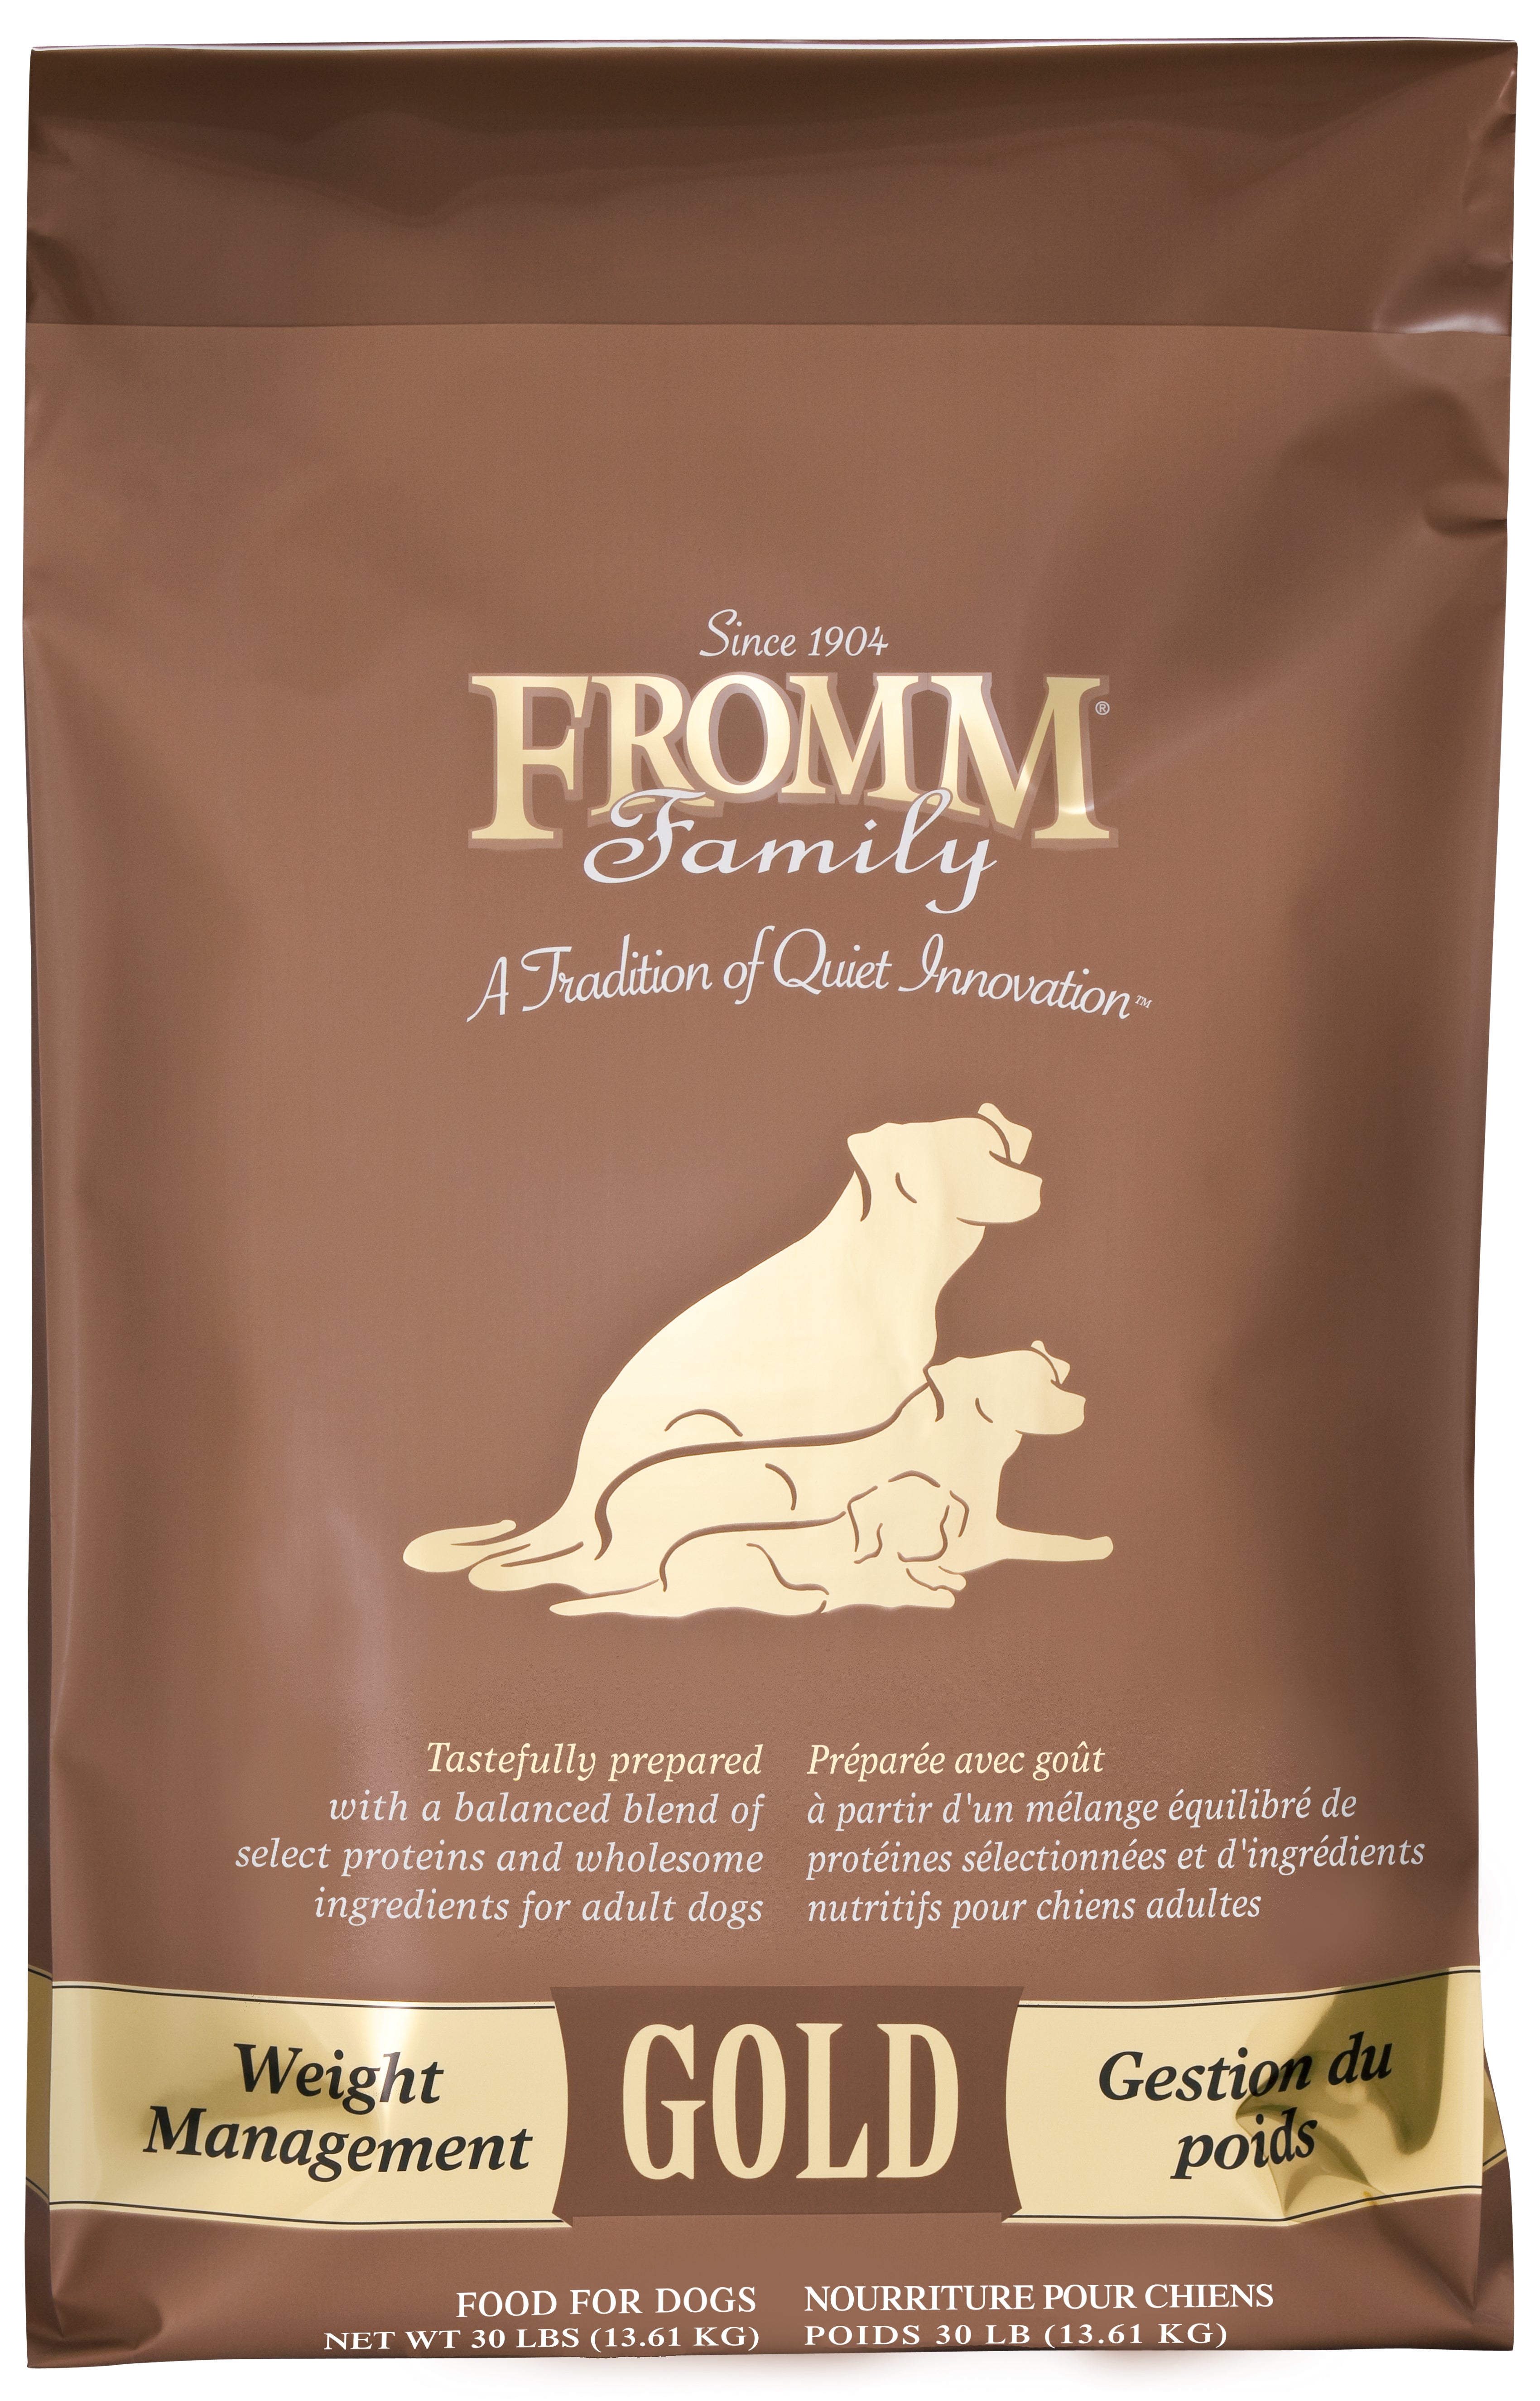 does fromm make puppy food